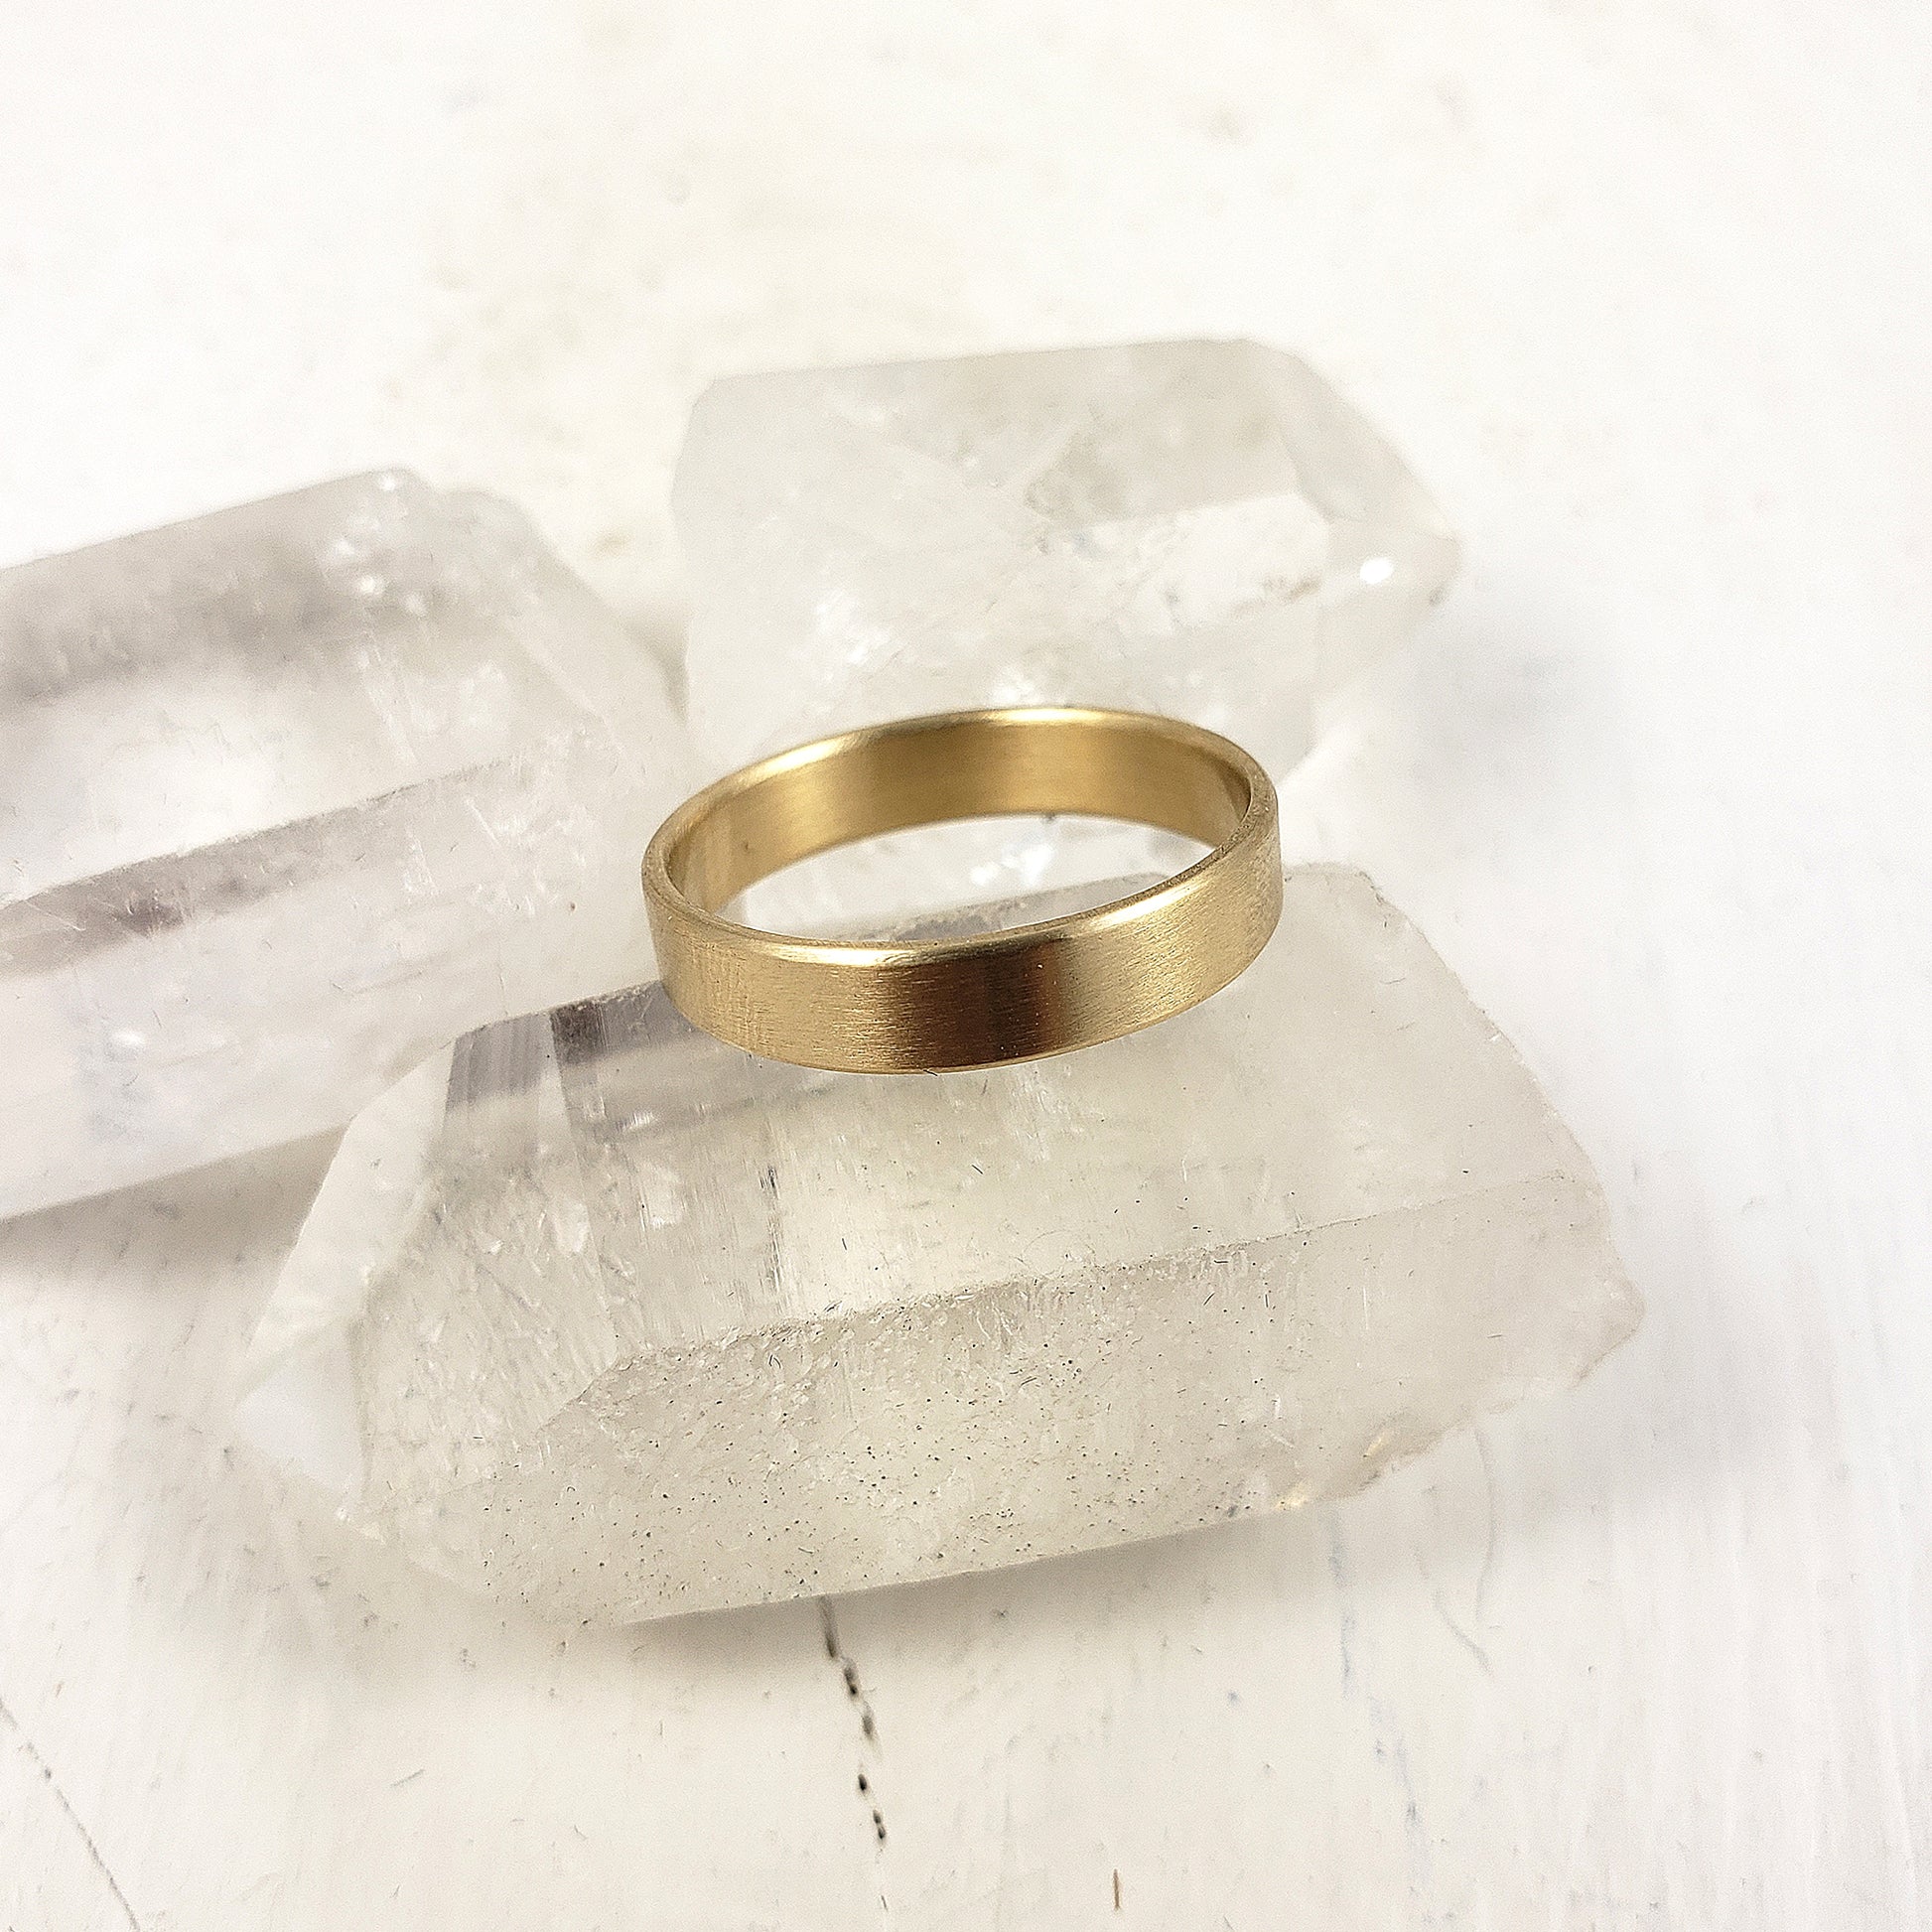 Unisex engagement band in solid god.